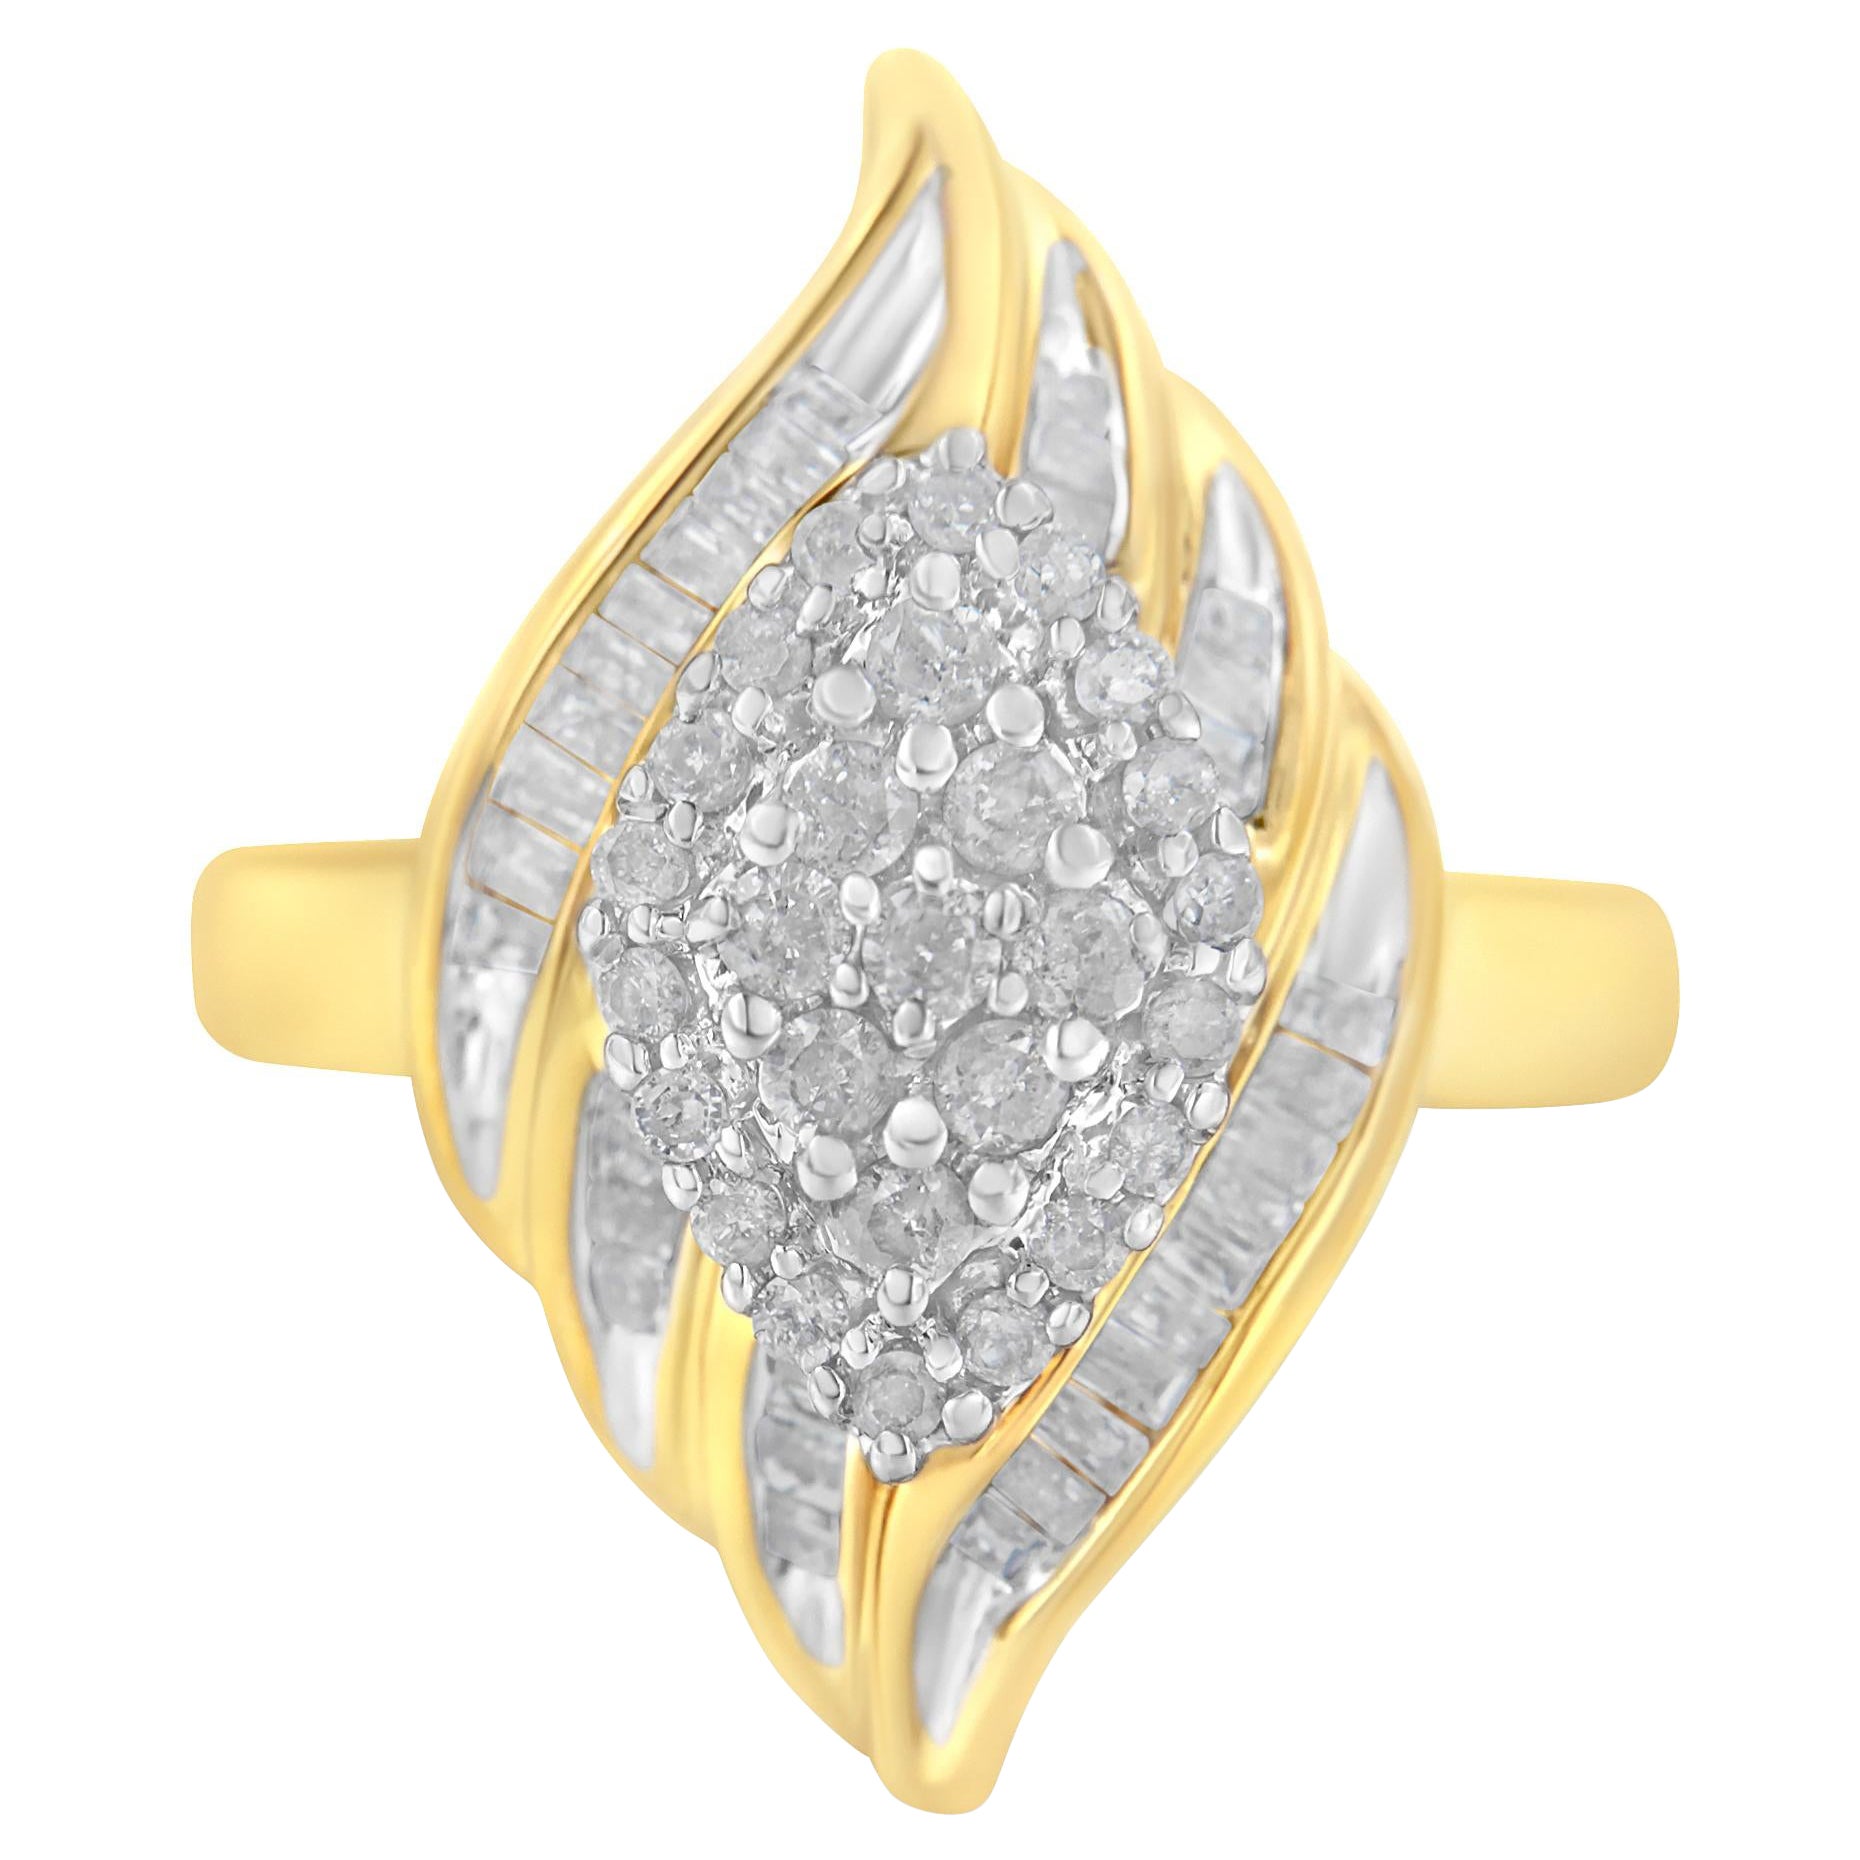 10K Yellow Gold 3/4 Cttw Diamond Cocktail Ring (I-J Color, I2-I3 Clarity) For Sale